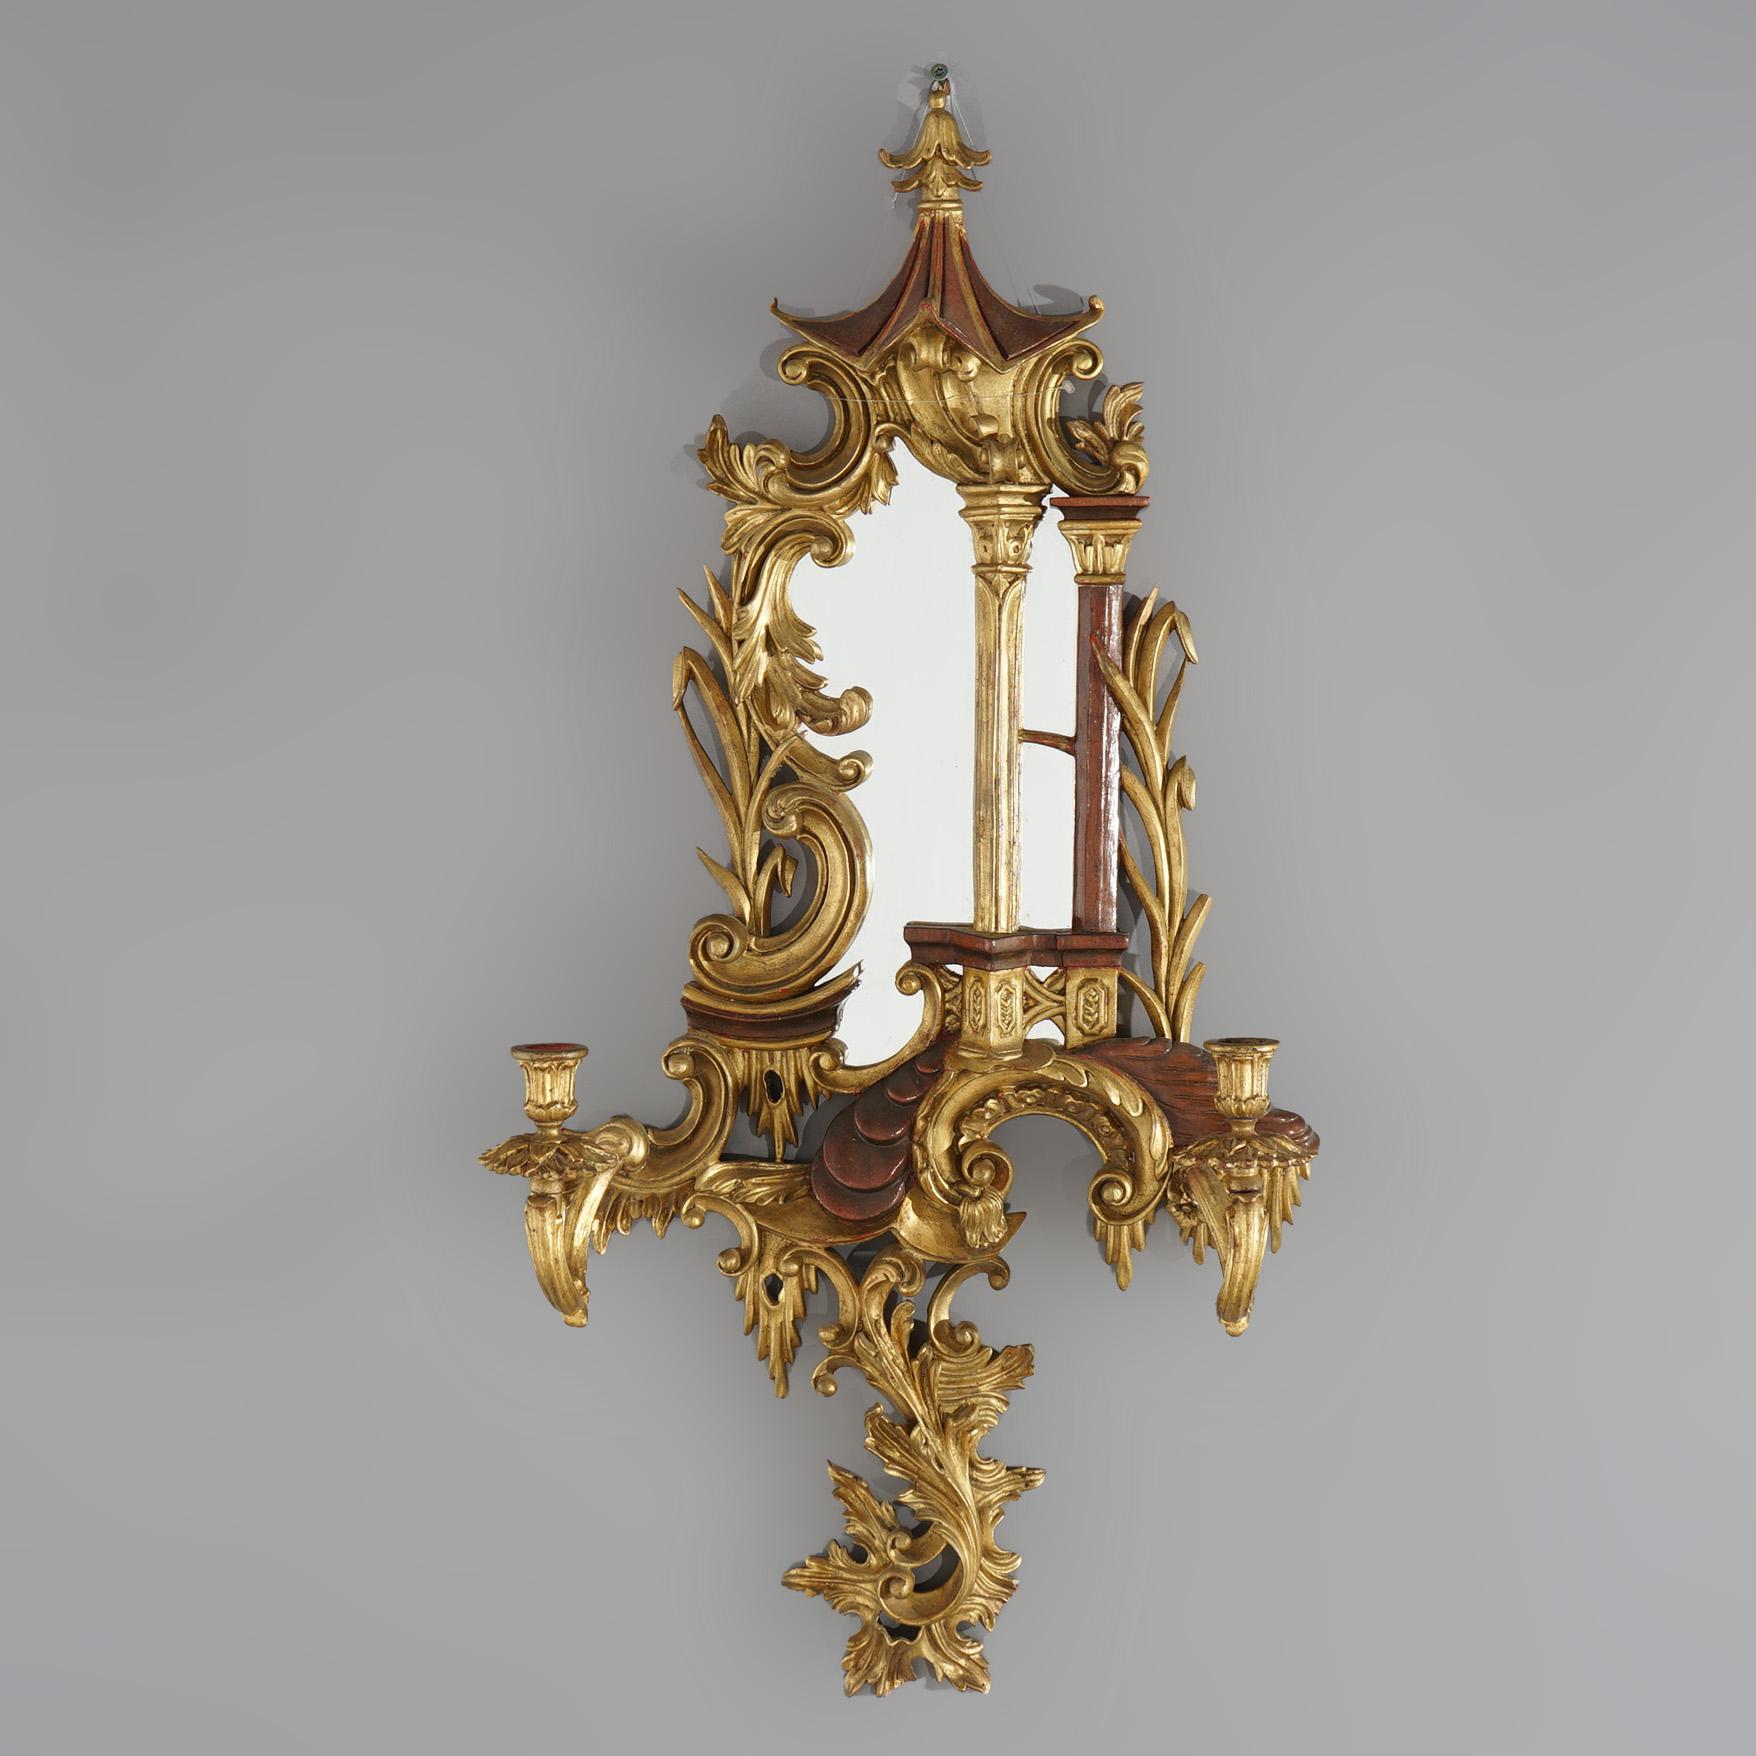 English Antique Large Chinese Chippendale Polychromed Giltwood & Mirrored Sconces c1920